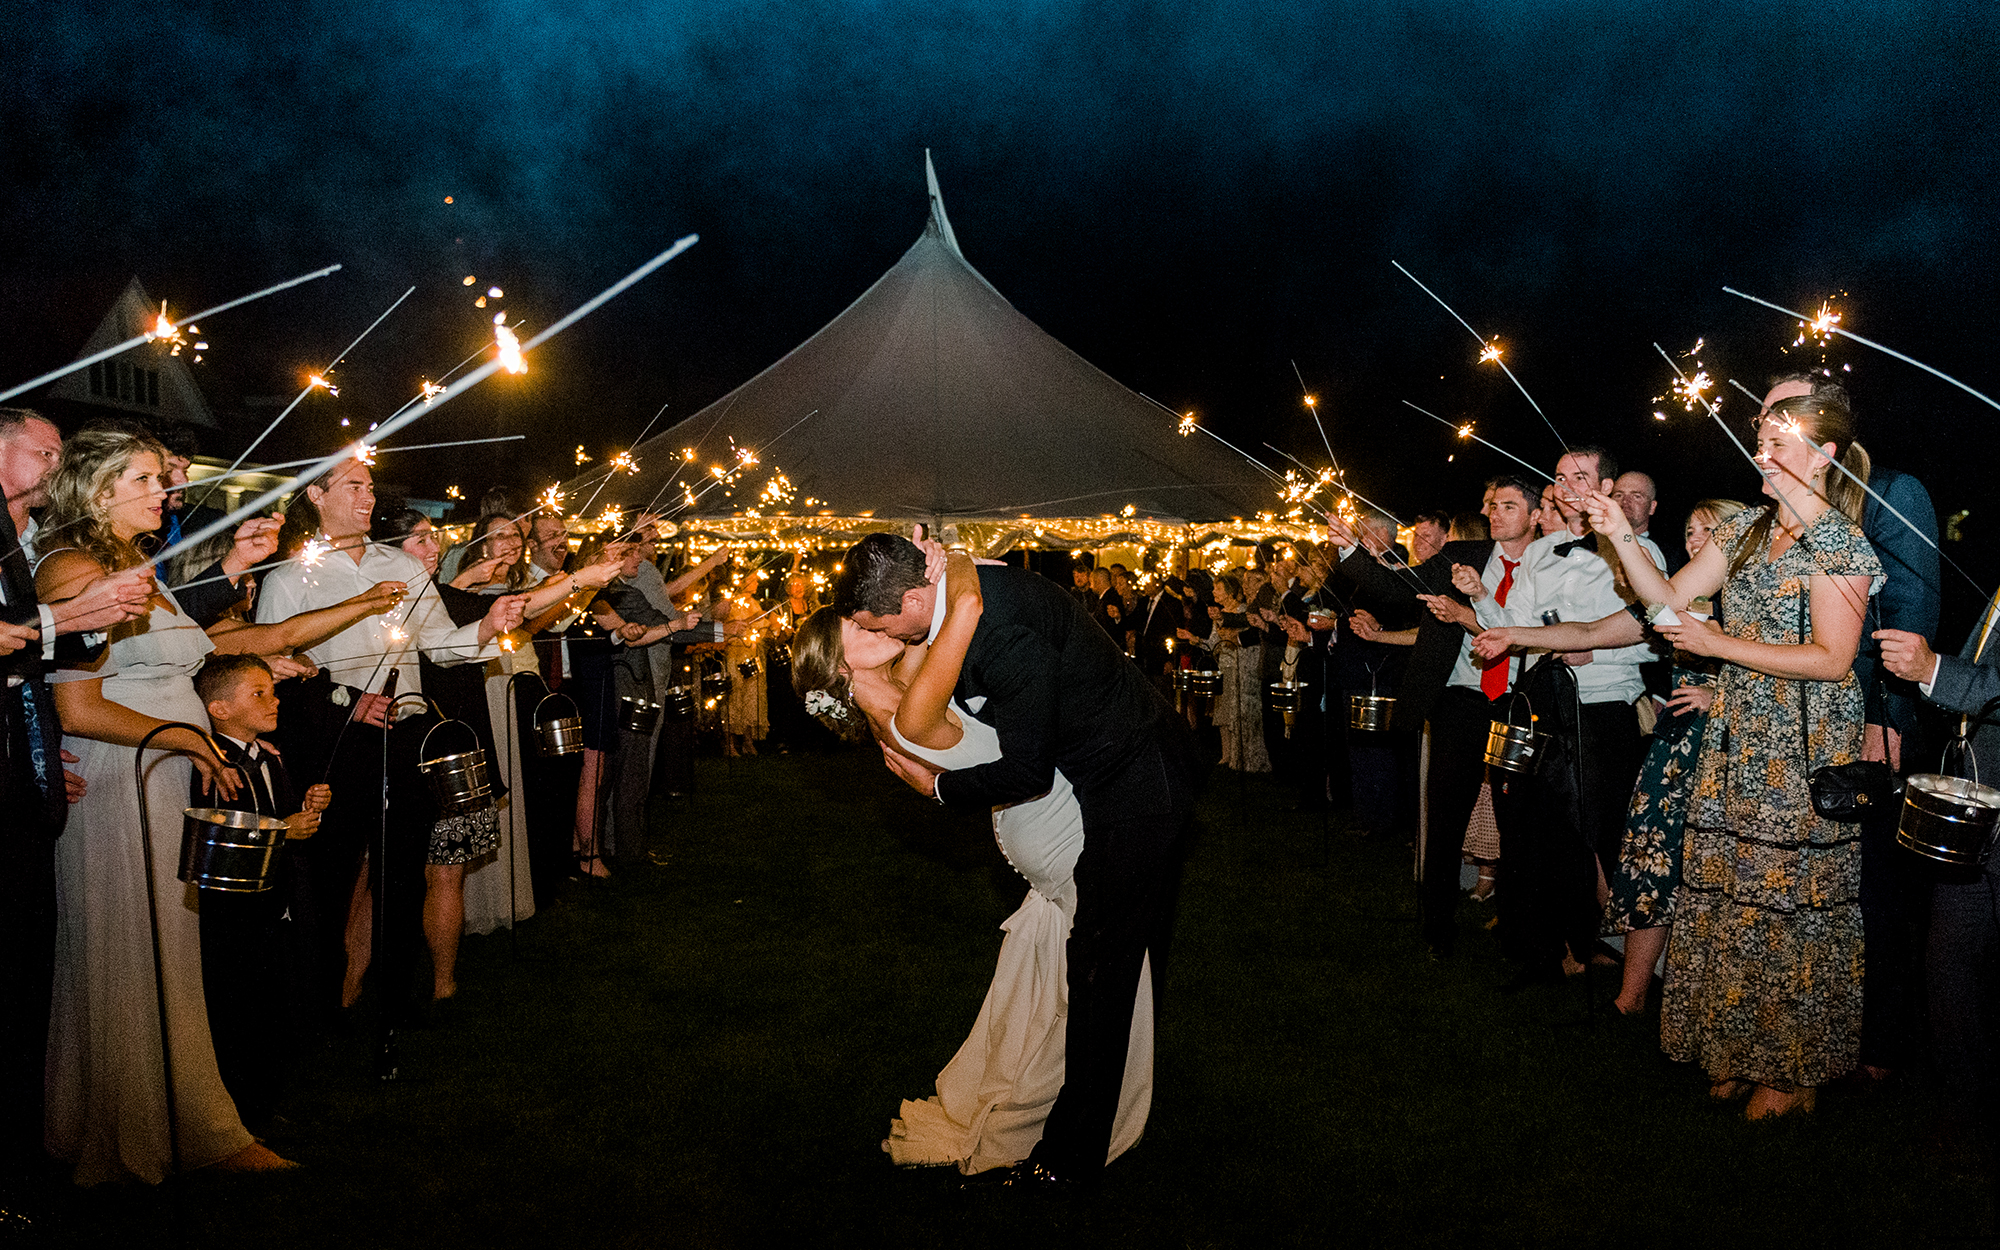 Bride and groom kissing surrounded by wedding party outdoors at night